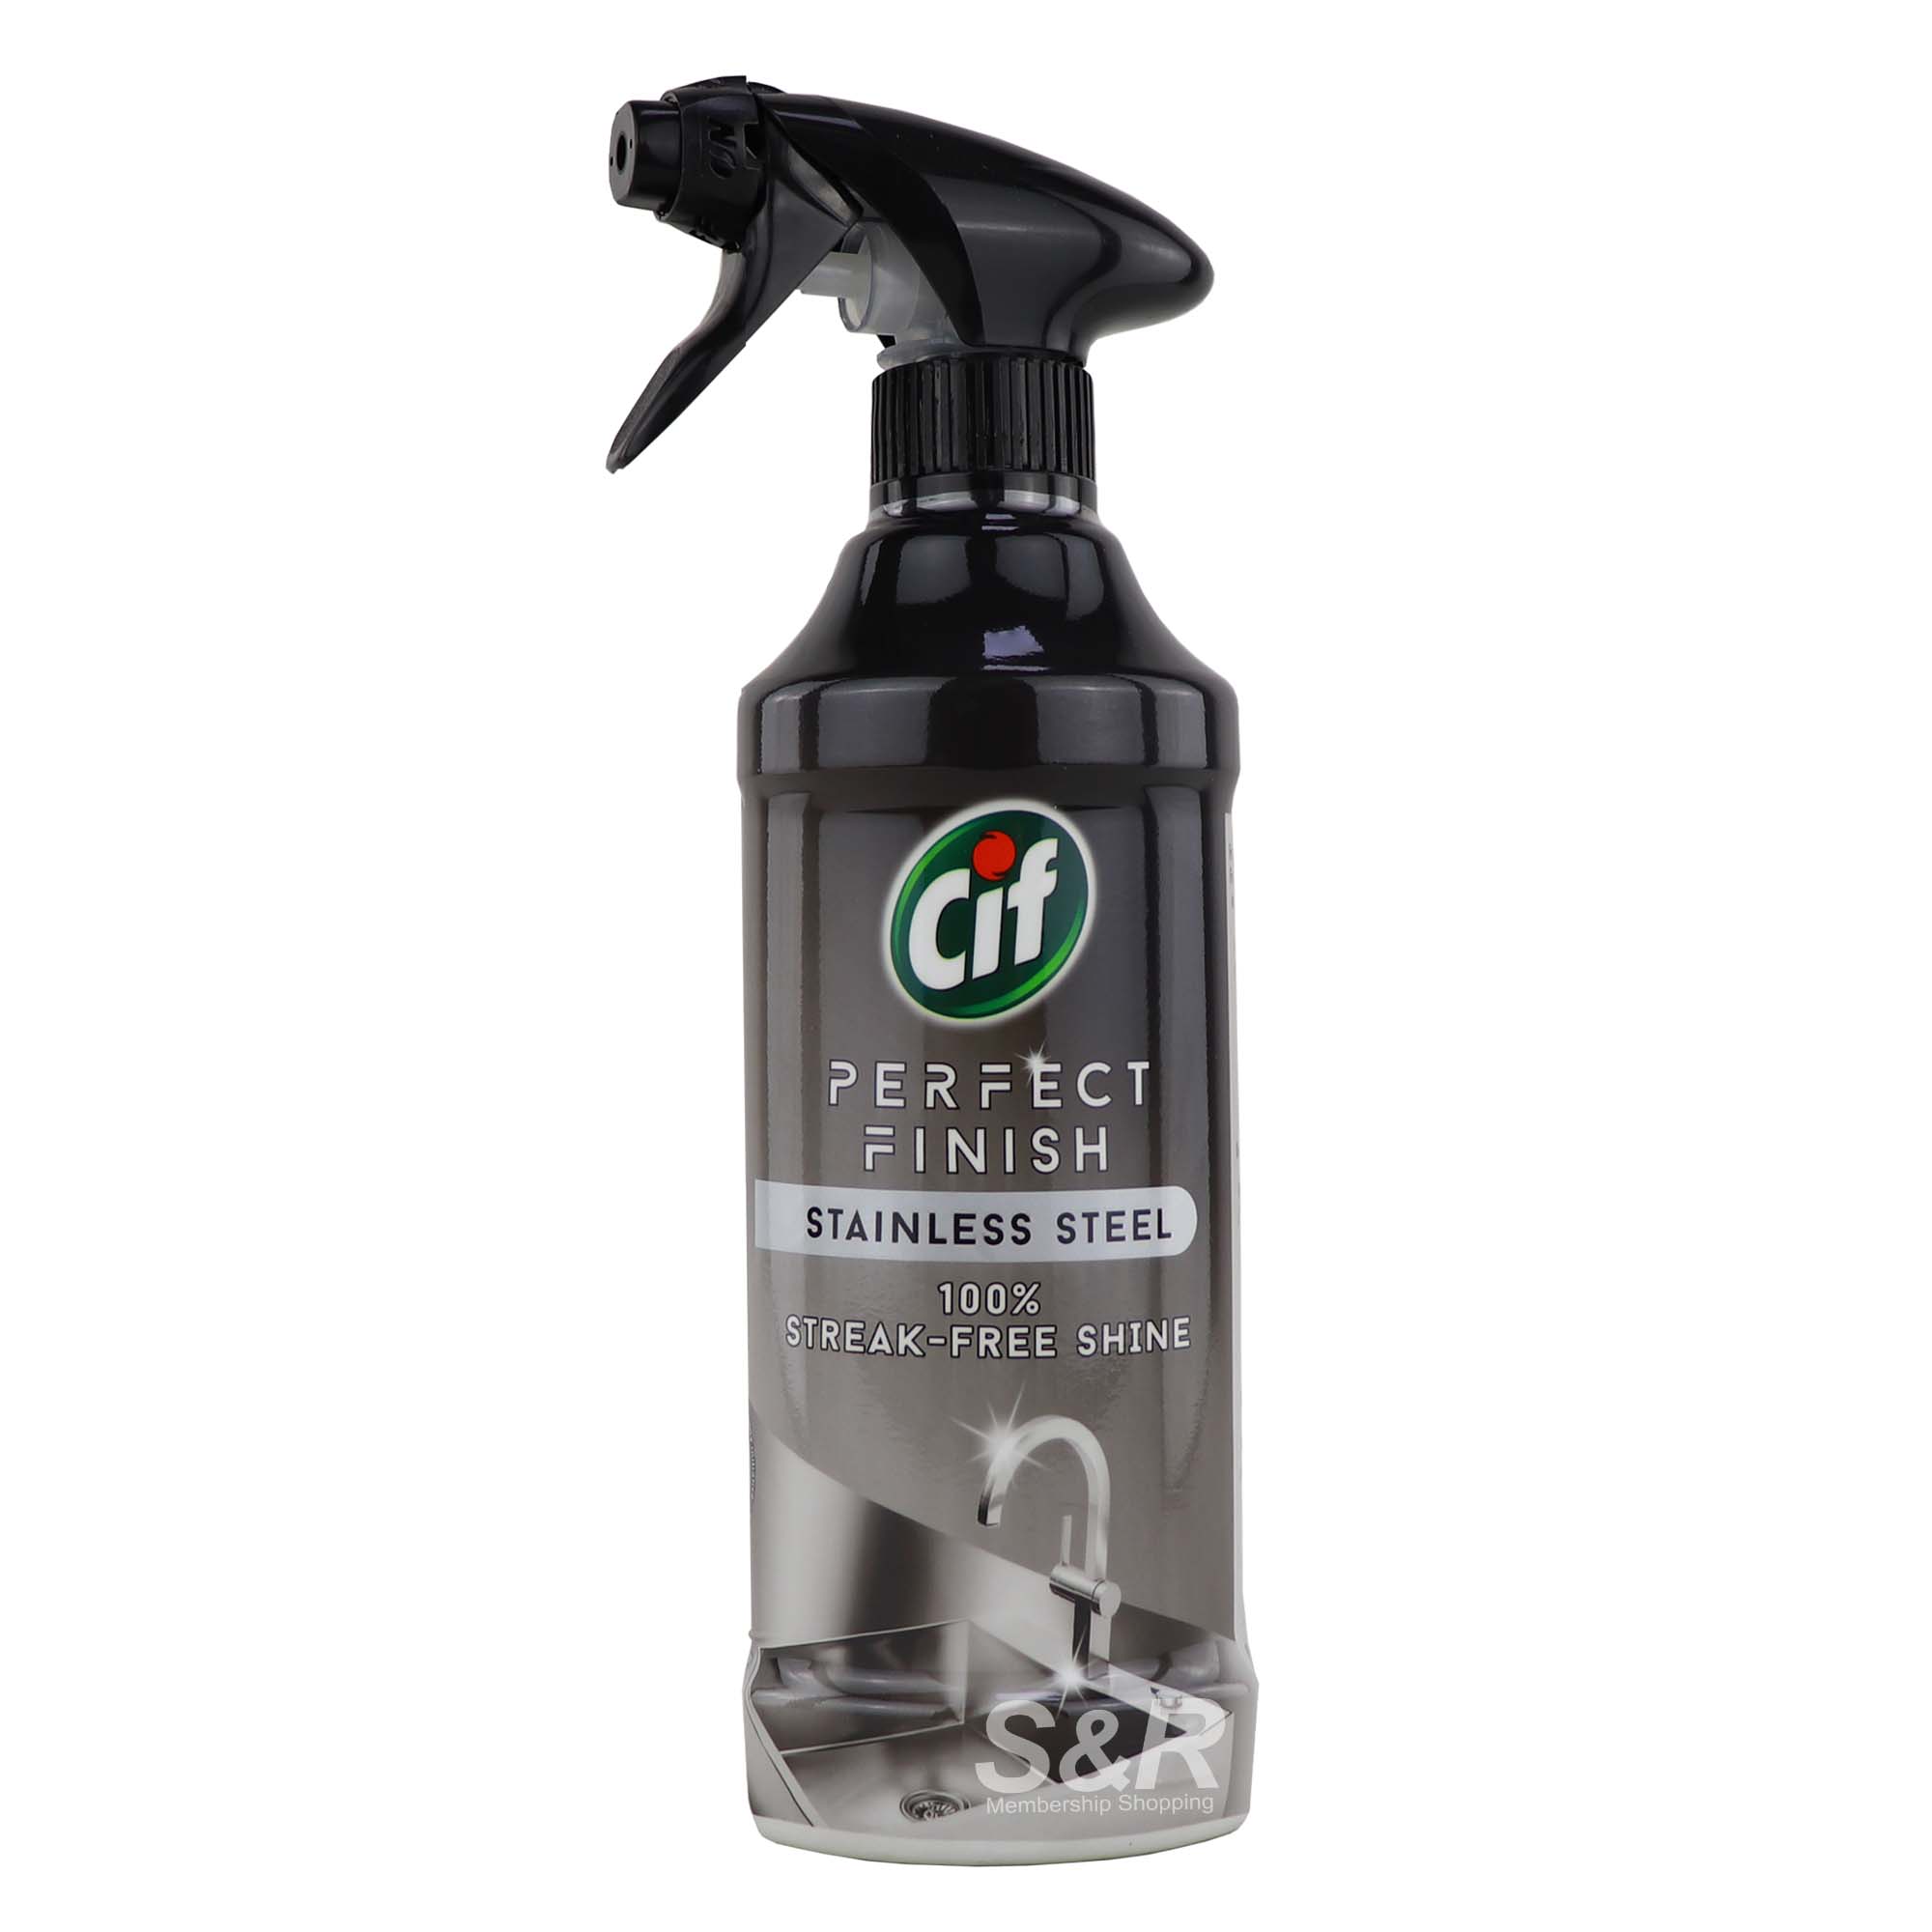 Cif Ultra Power Stainless Steel Cleaner 435mL